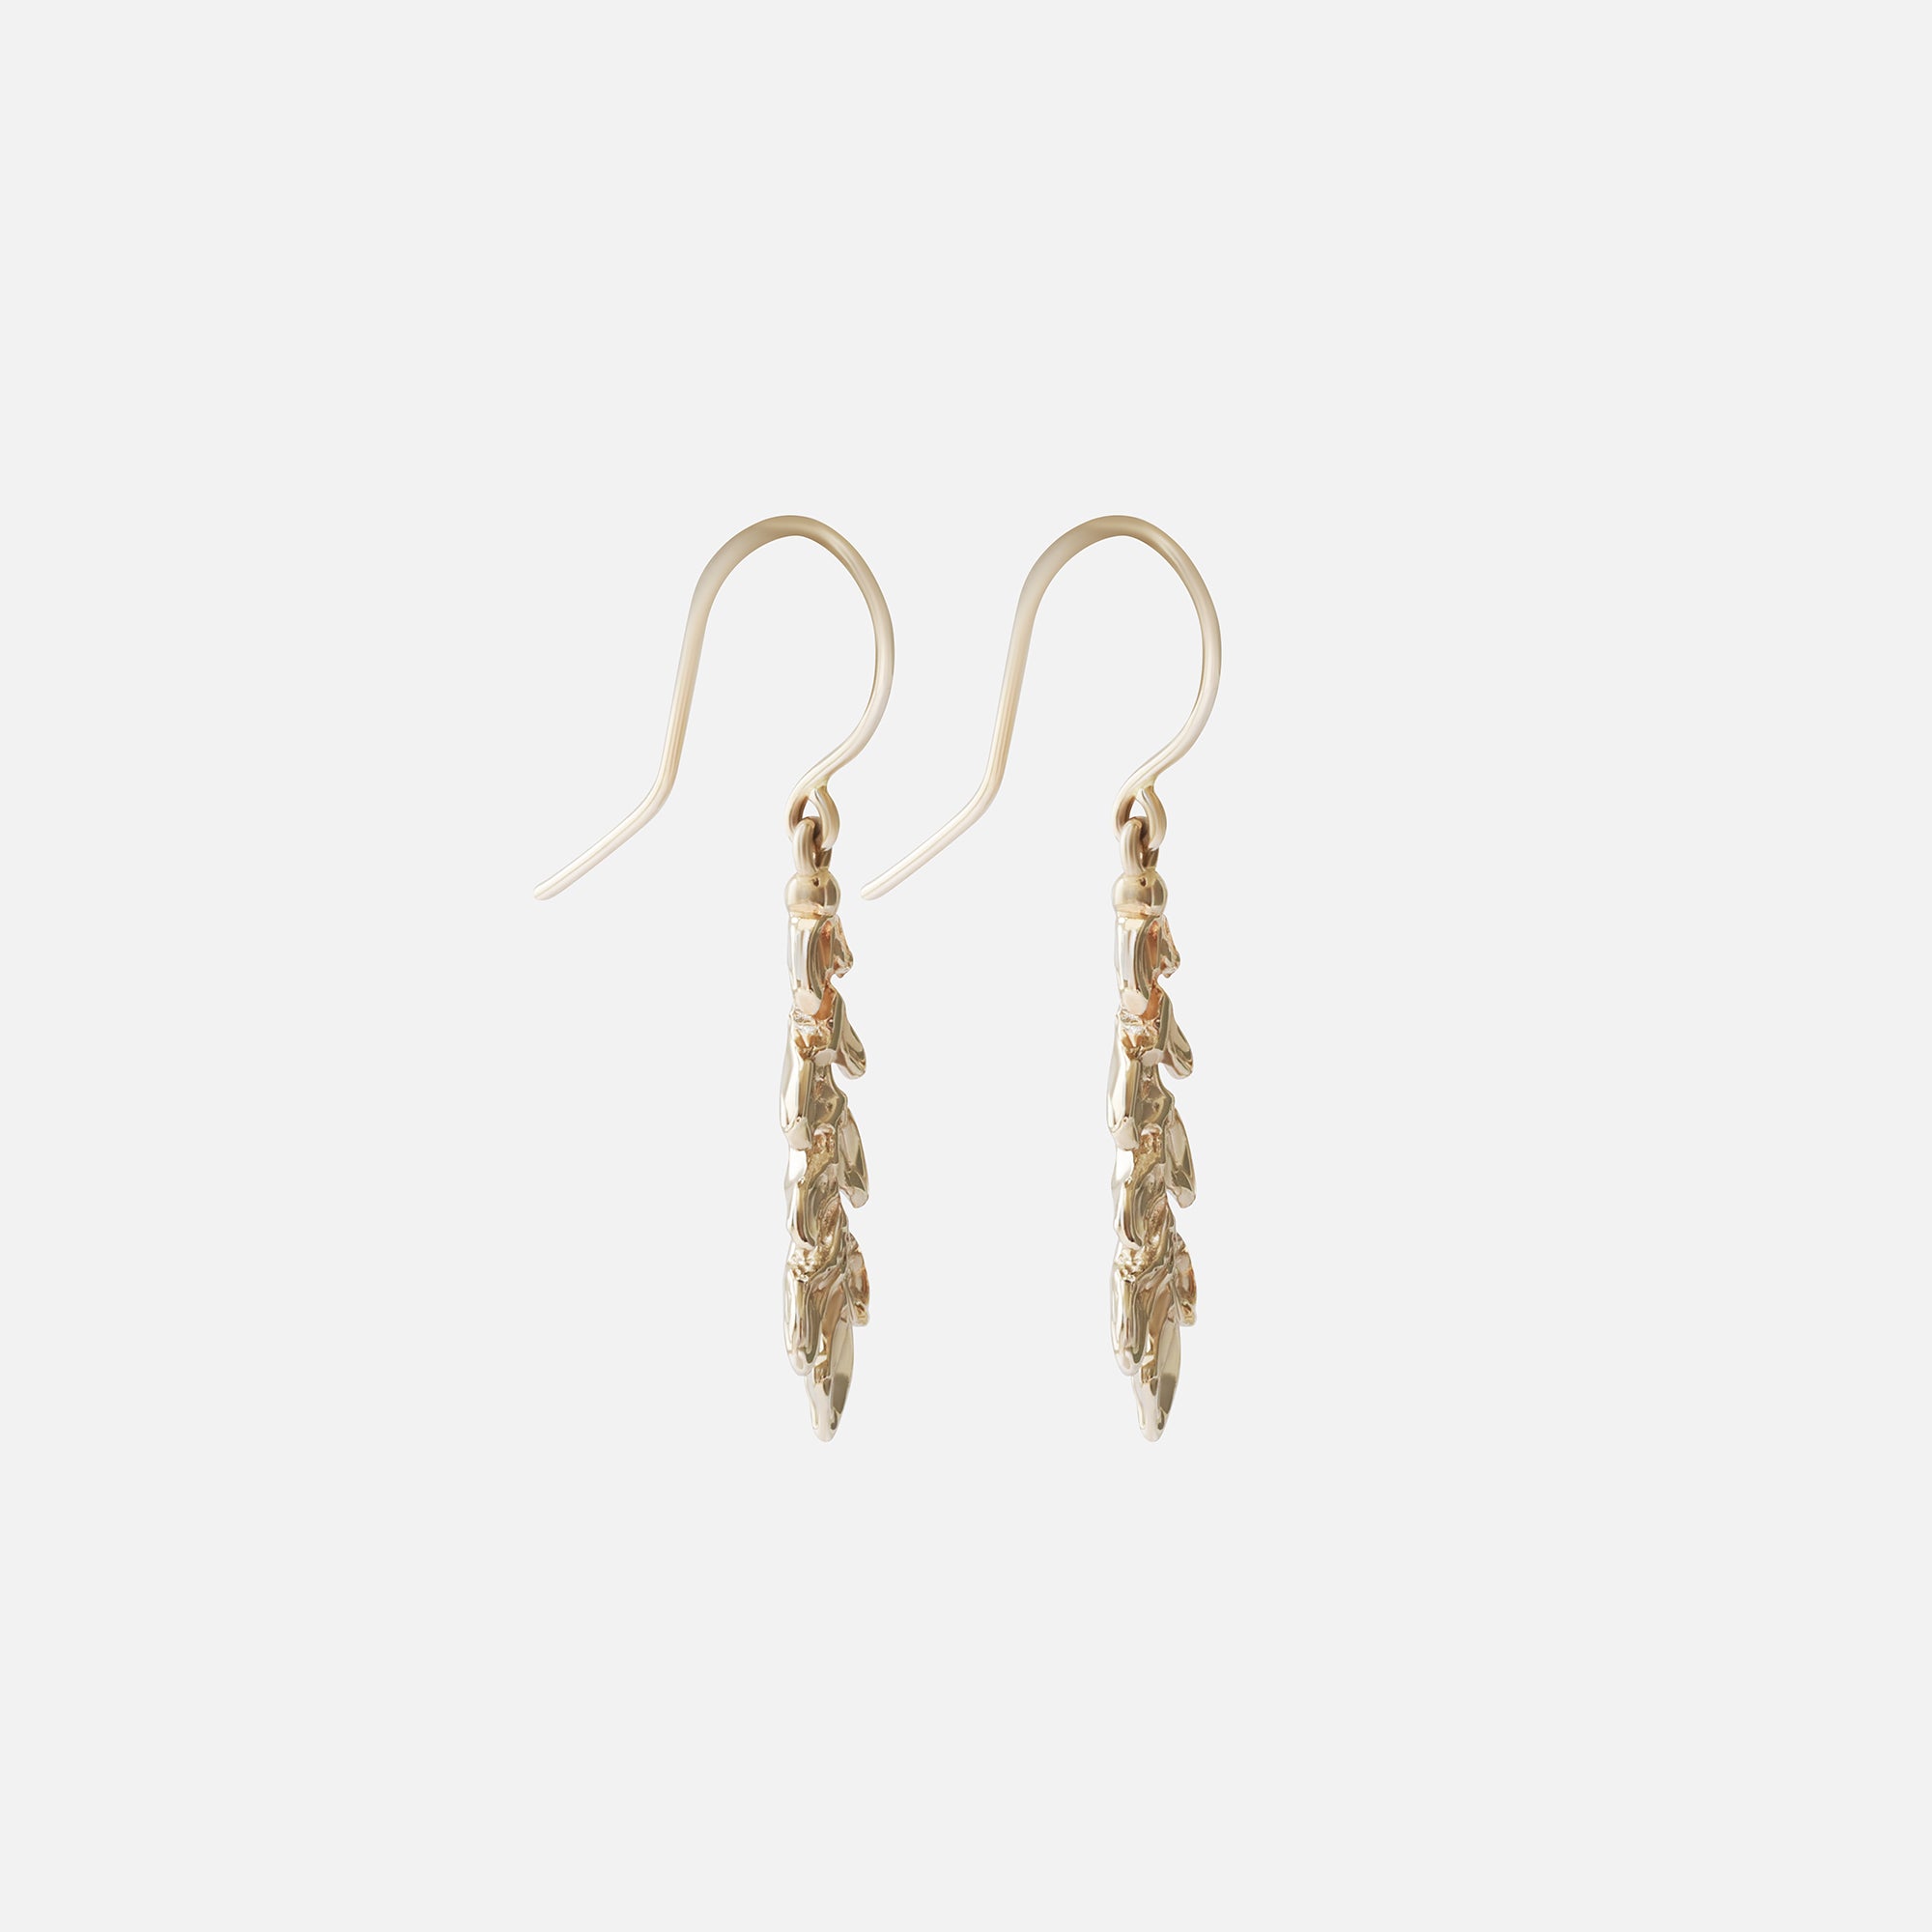 Inverted Branch / Earrings By O Channell Designs in earrings Category